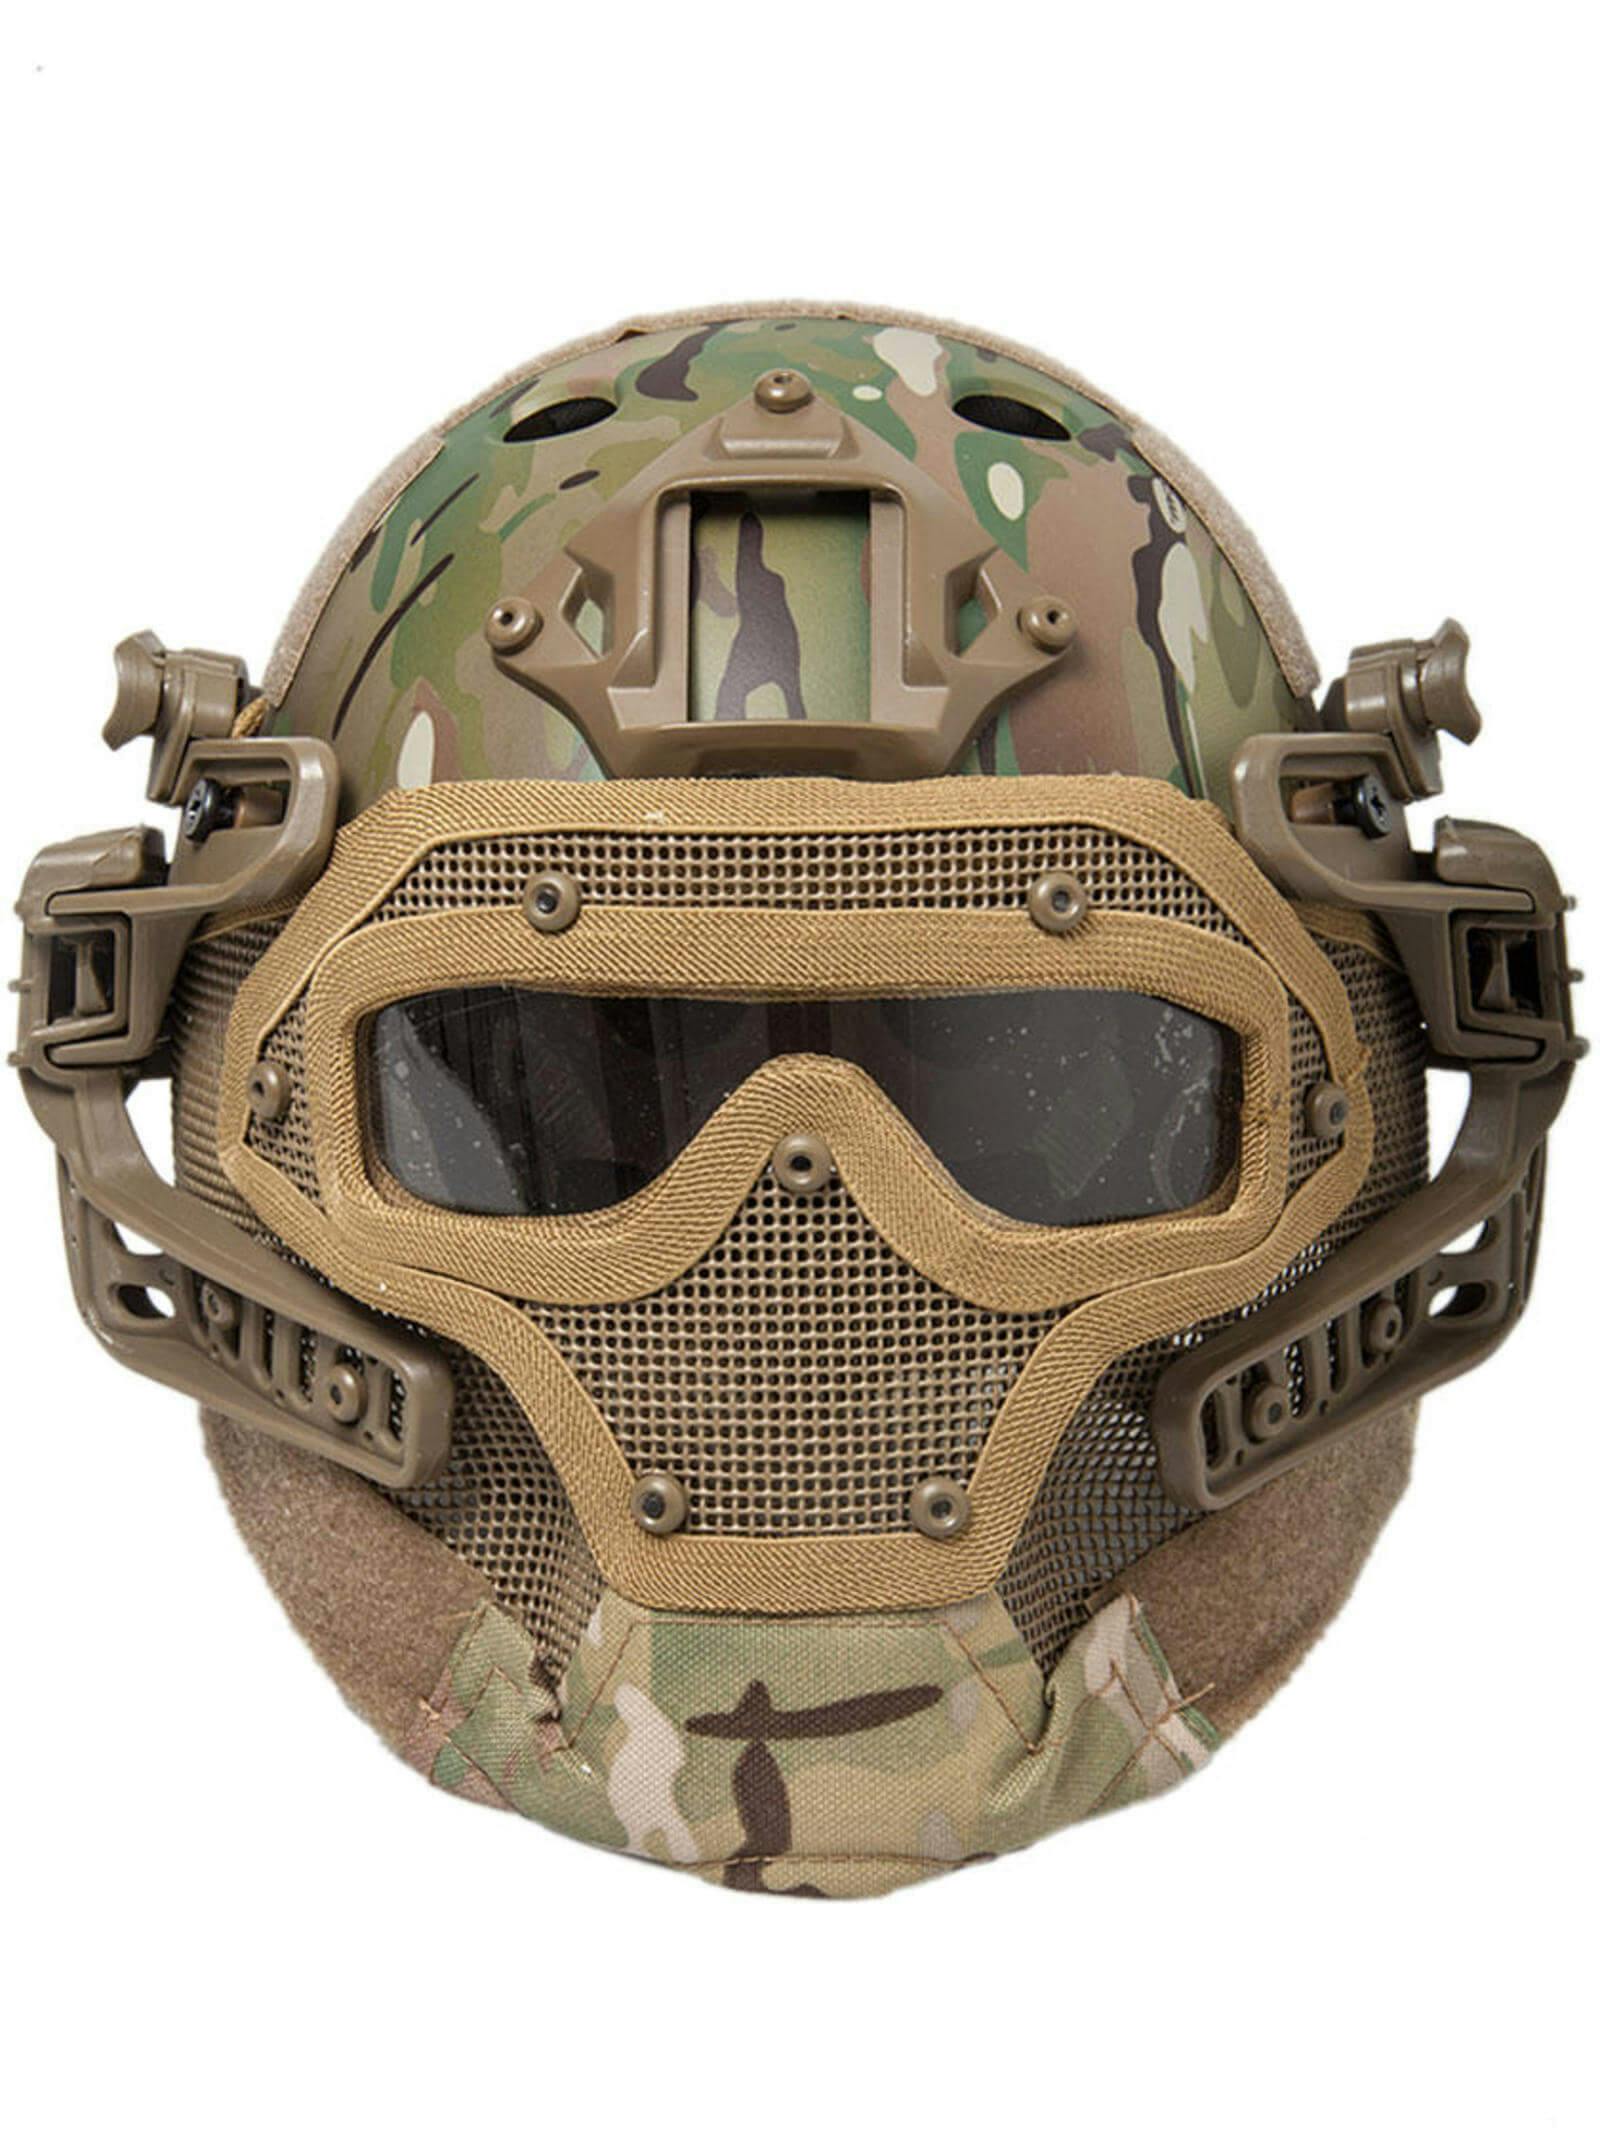 Tactical Airsoft Speed Helmet PJ Type and Airsoft Steel Mesh Mask with UV Protection Outdoor Glasses Goggles for Paintball Role Playing War Games 